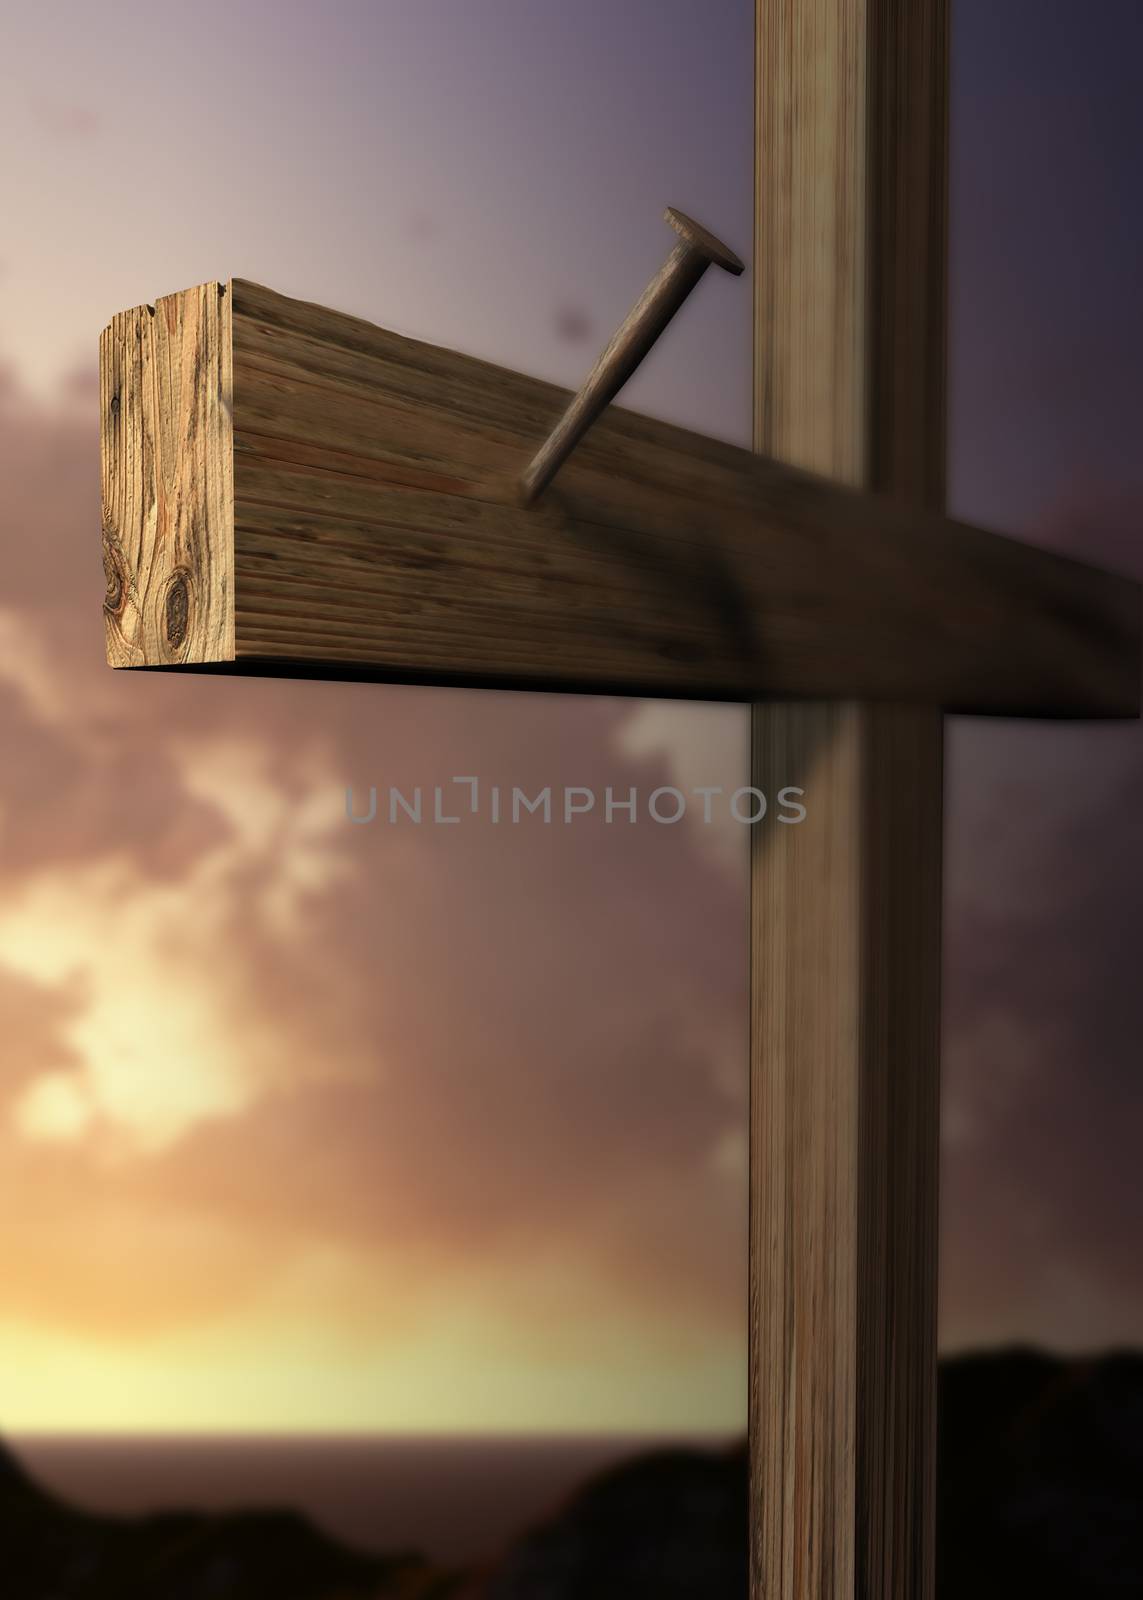 The cross of Golgotha the place of hope made in 3d software